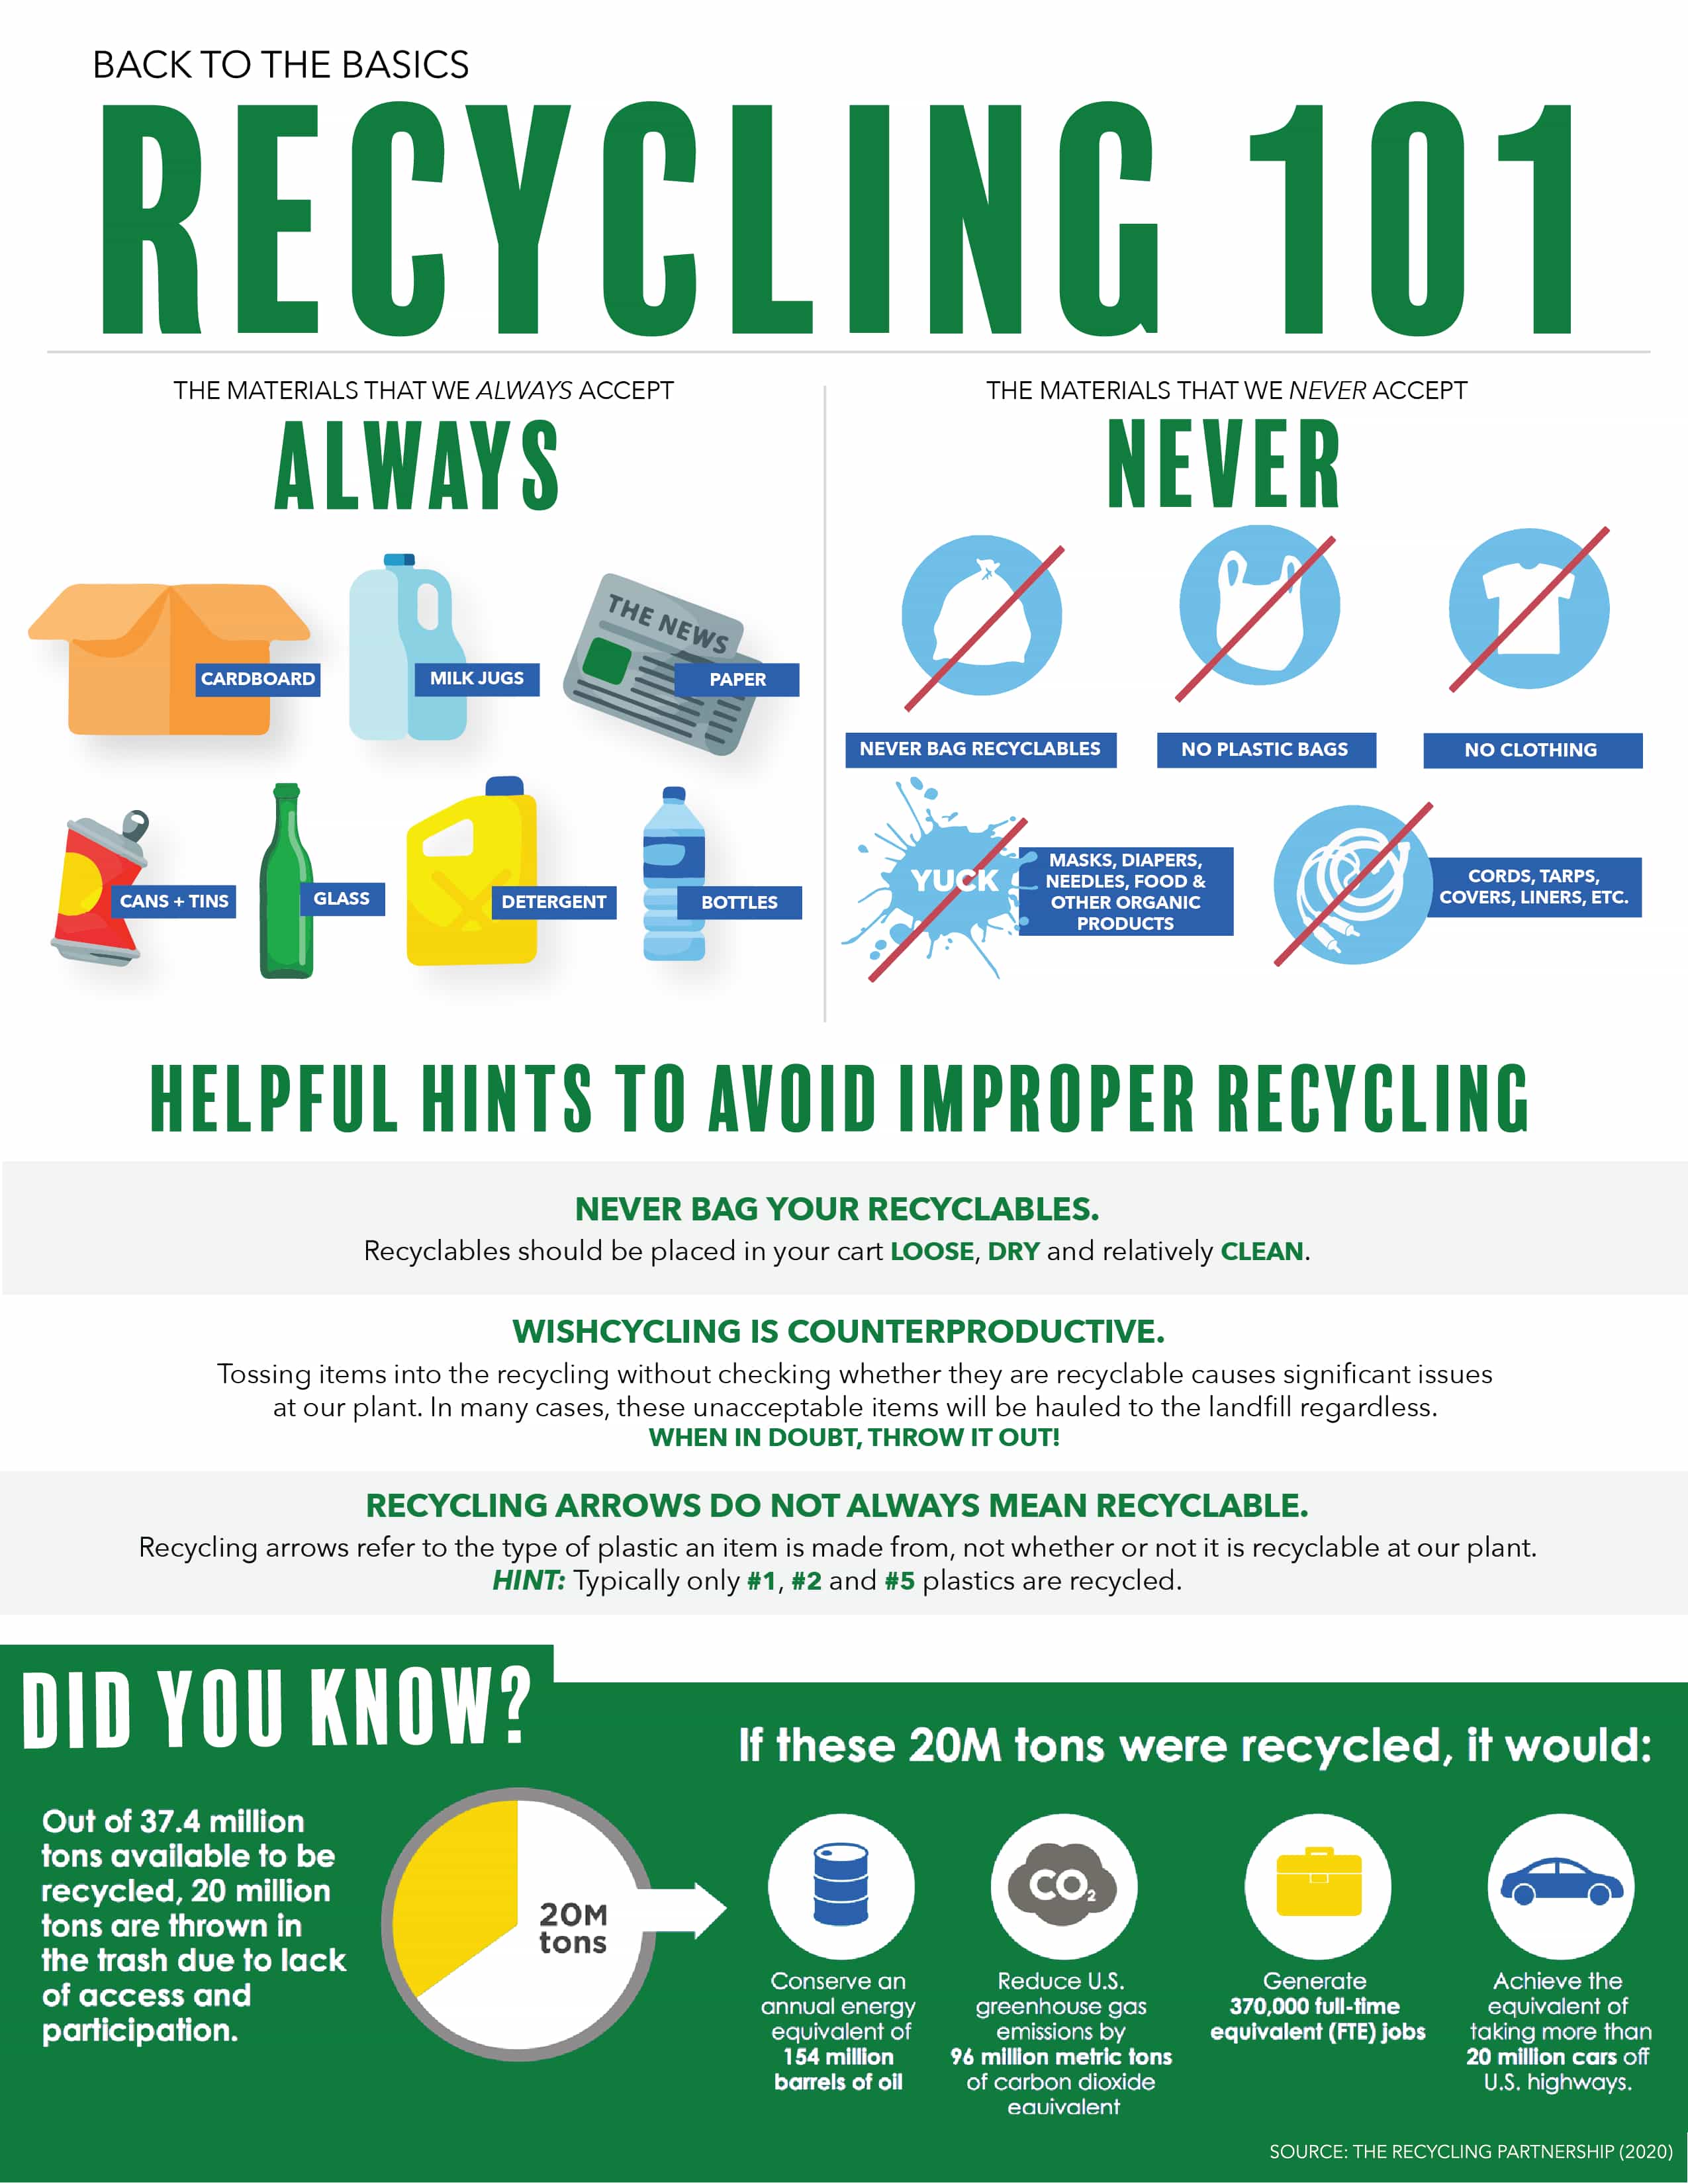 Recycling 101